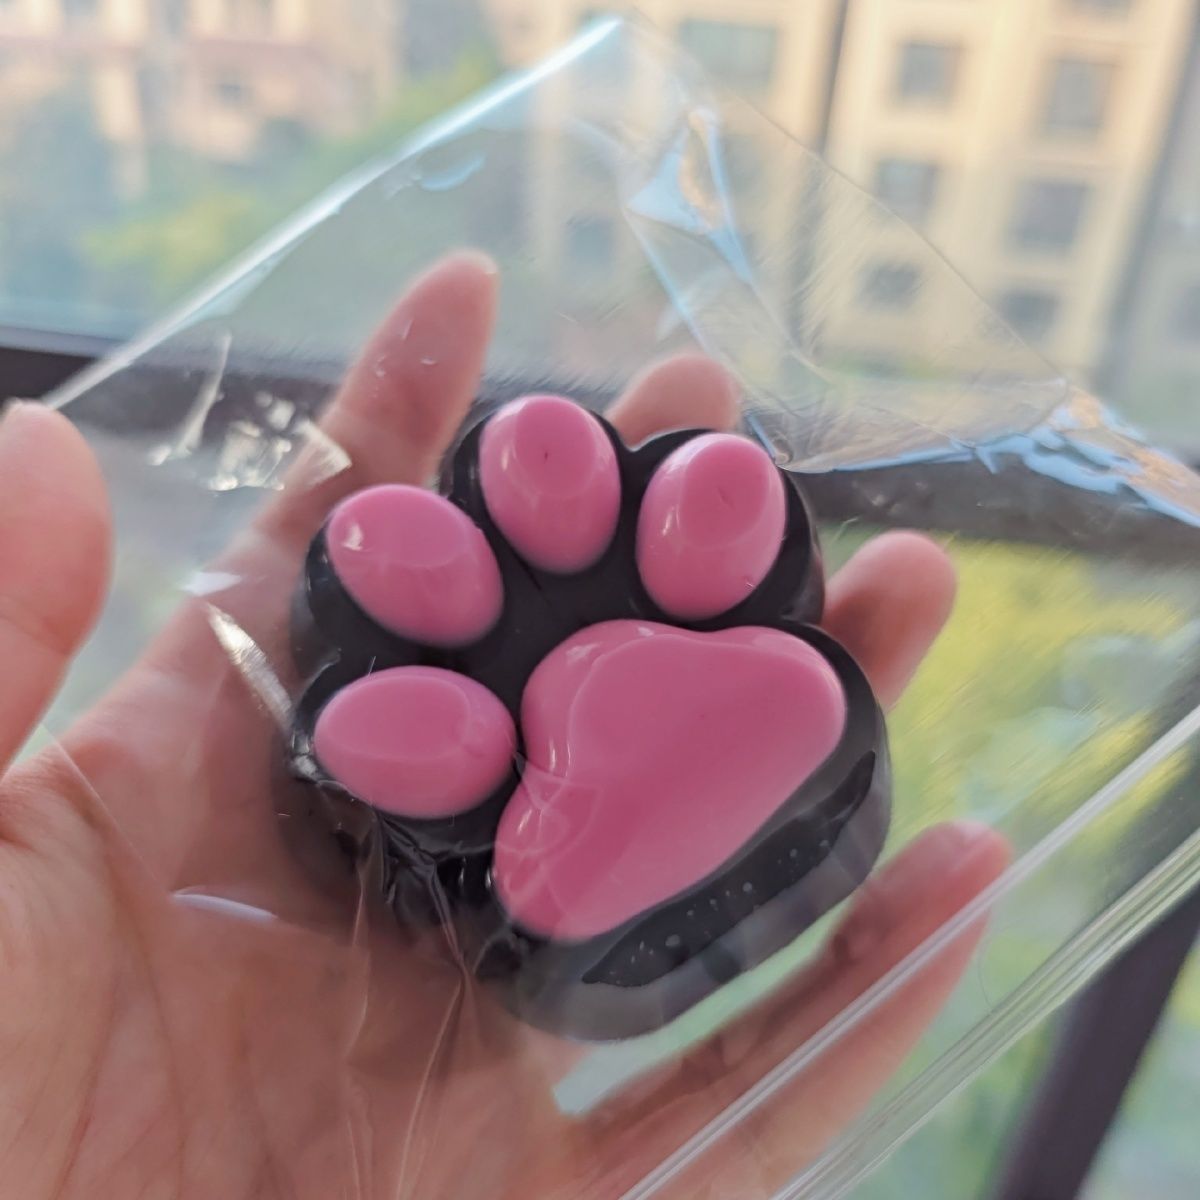 Hamemade Silicone Cat's Paw  Stress Relief Squishy Toy Black-Pink Black -White